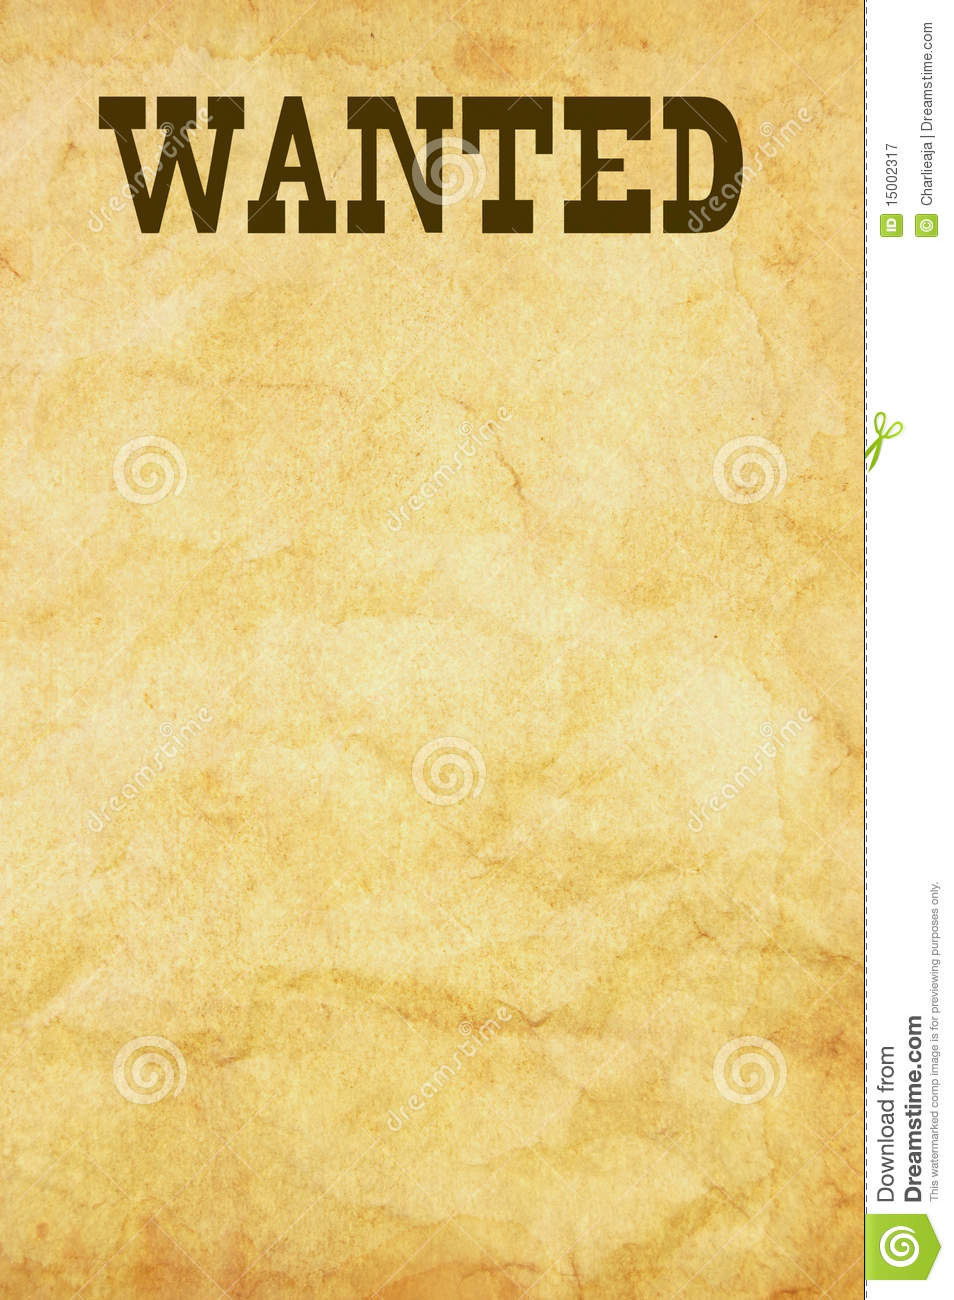 Wanted Poster Royalty Free Stock Photography   Image  15002317